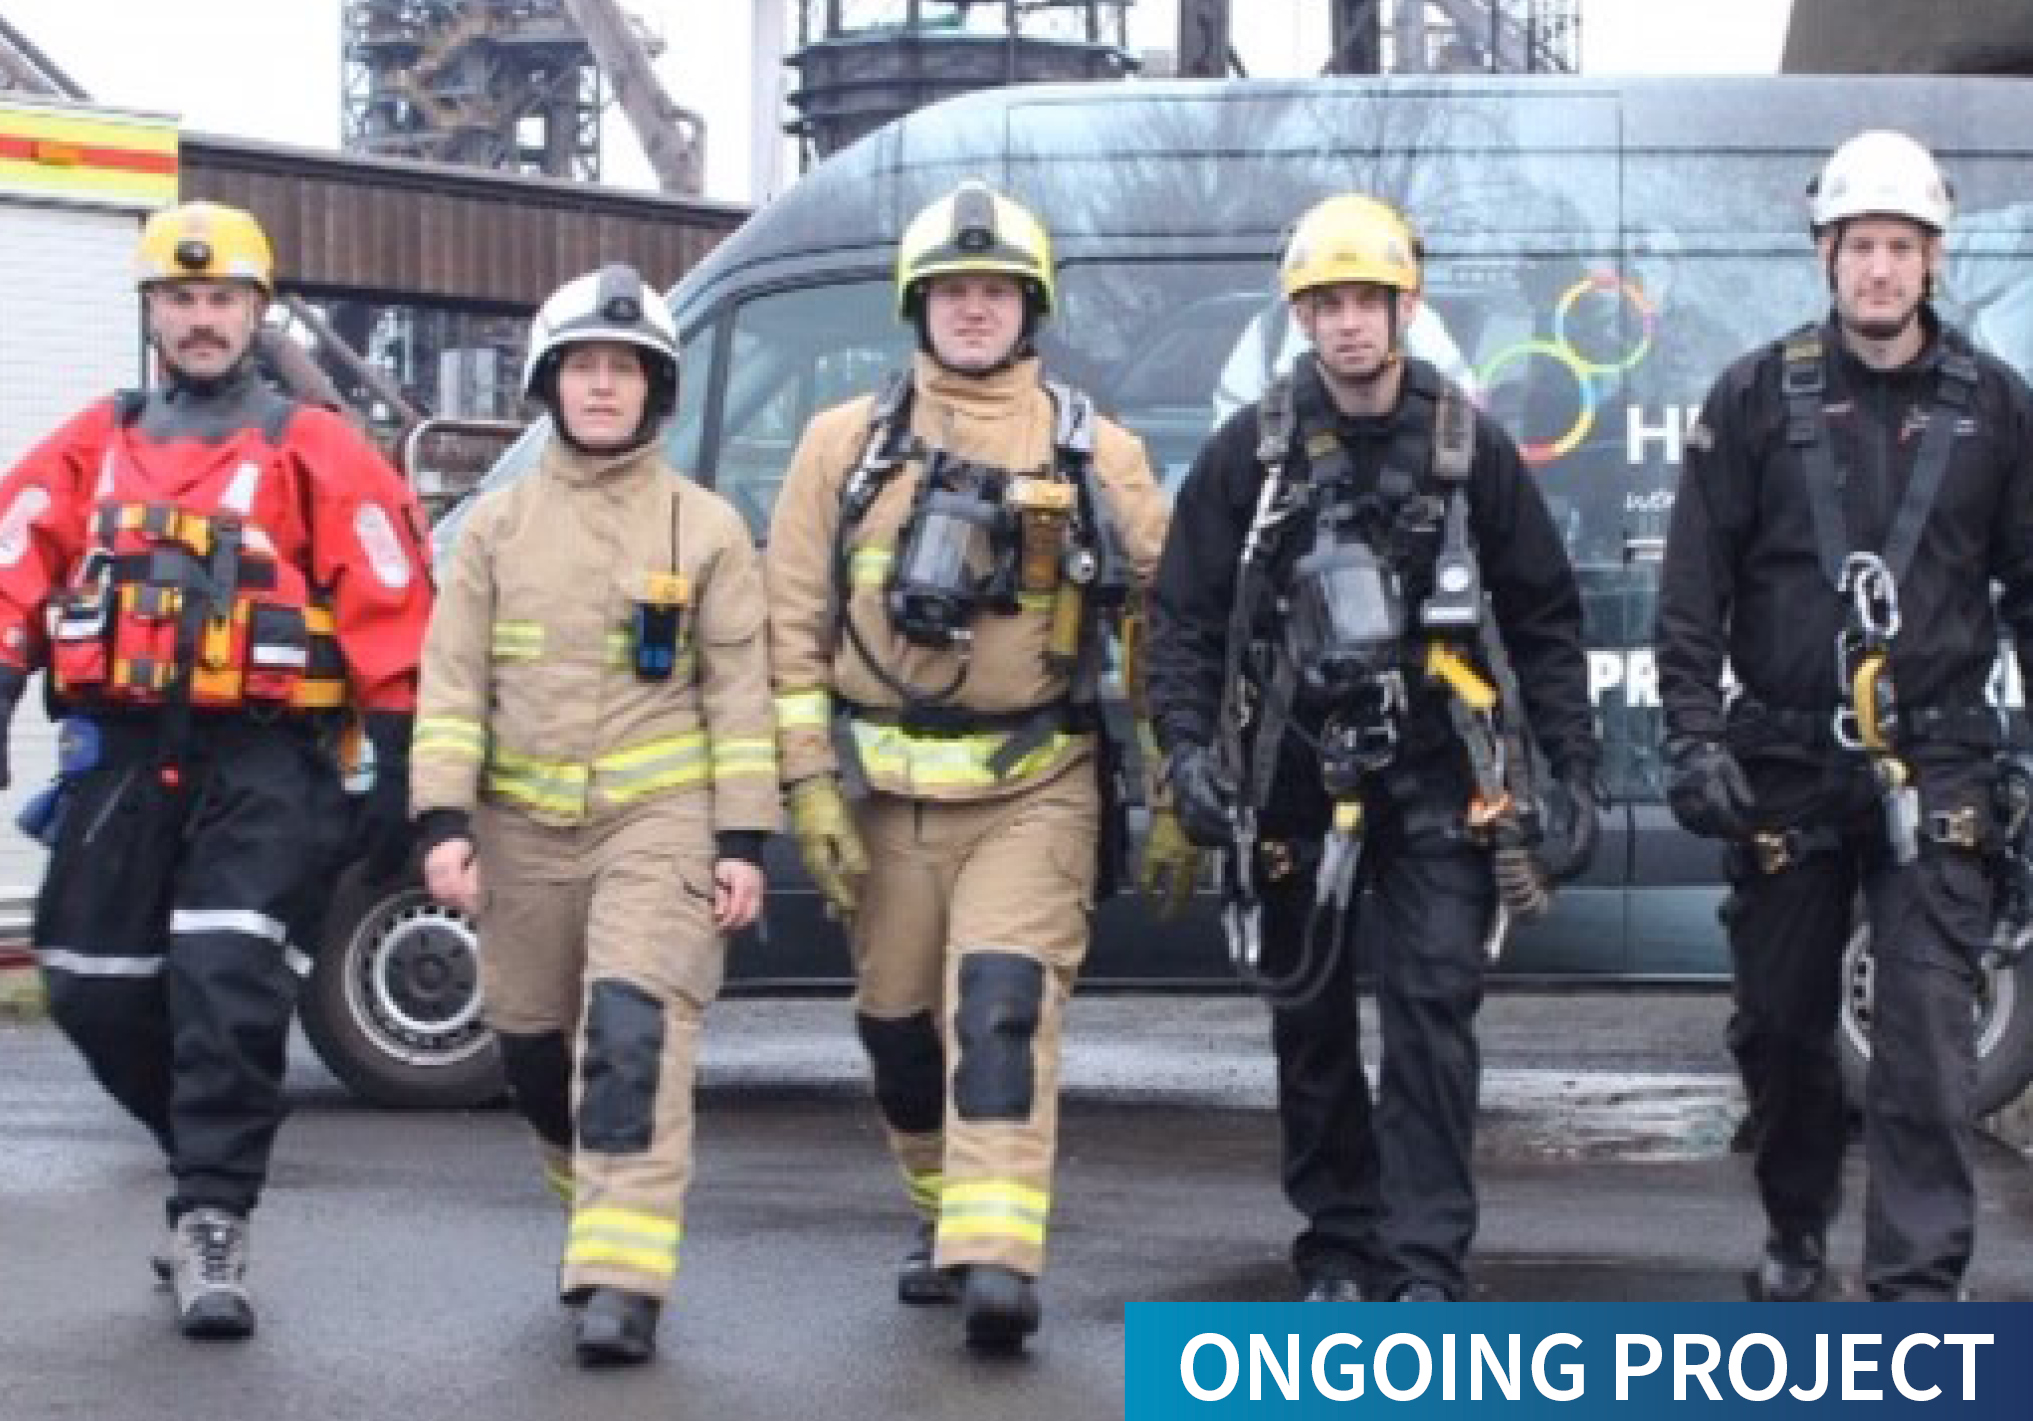 Humber Fire & Rescue Solutions staff in full gear, walking towards the camera from a liveried work van